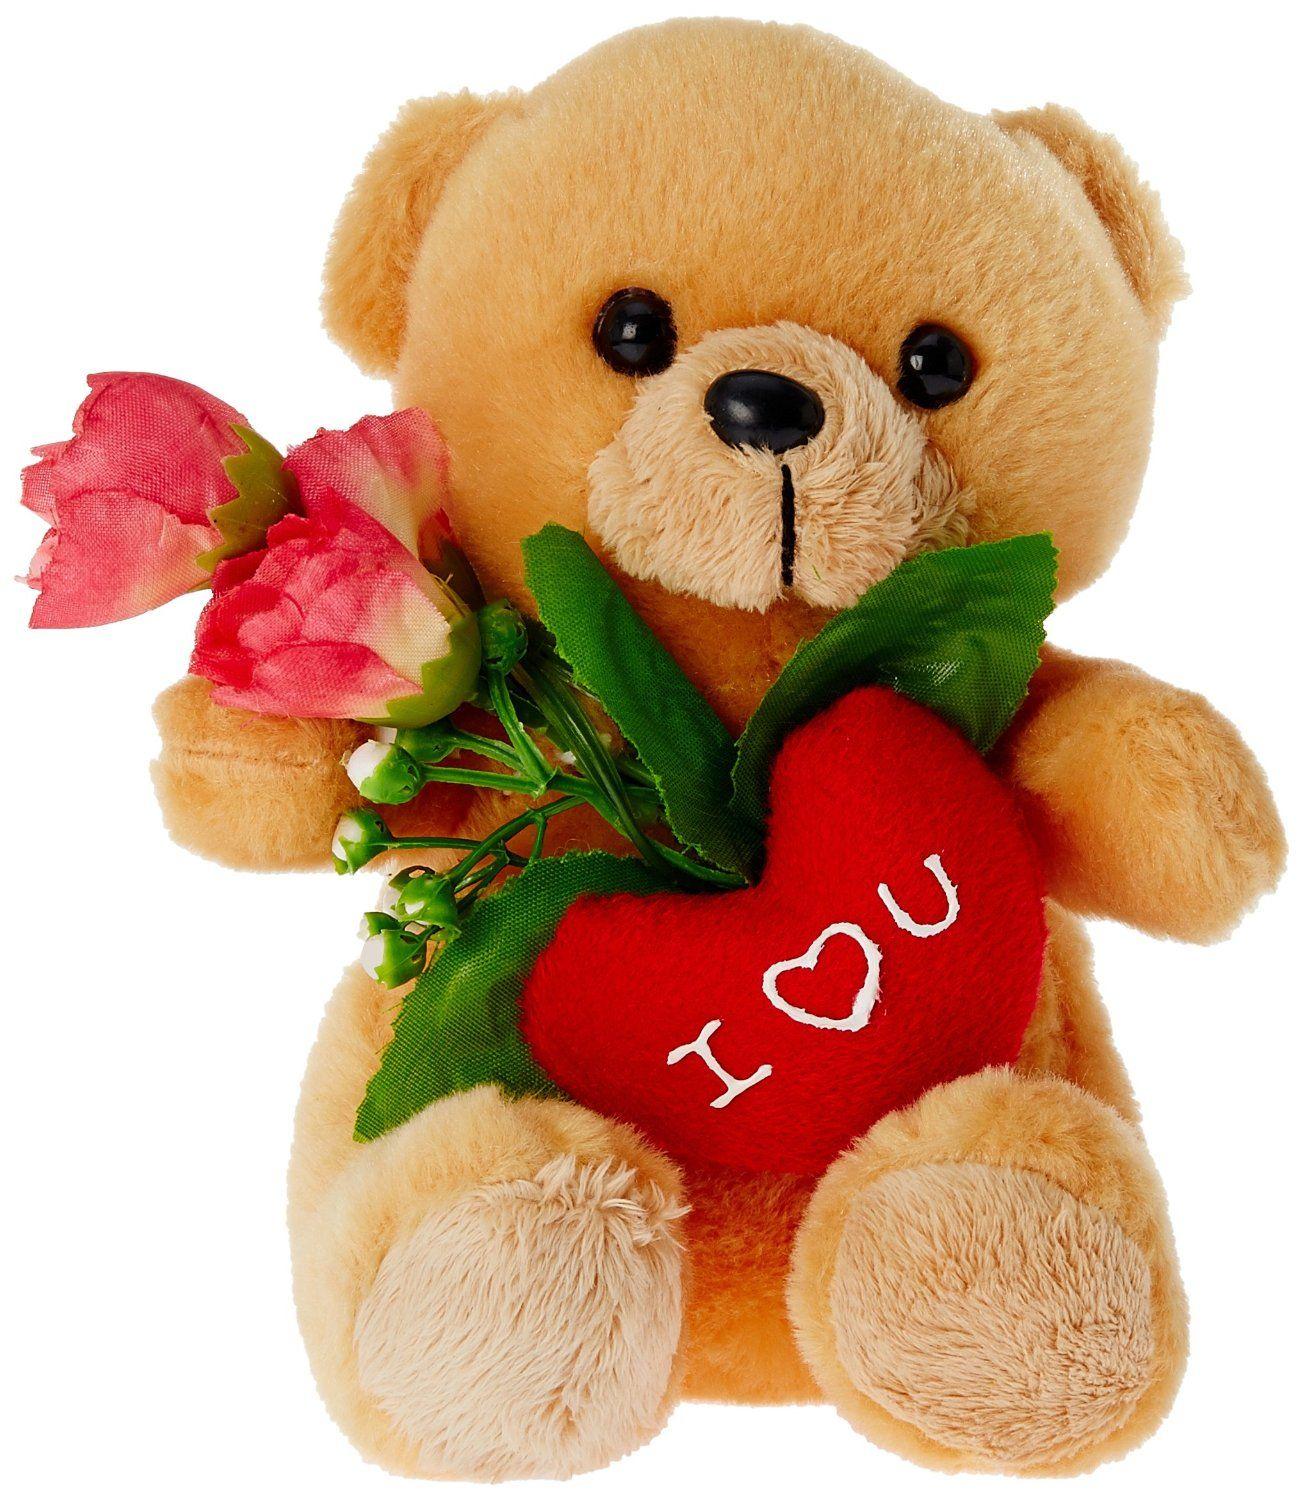 I Love You Teddy Bear HD Wallpapers - Wallpaper Cave